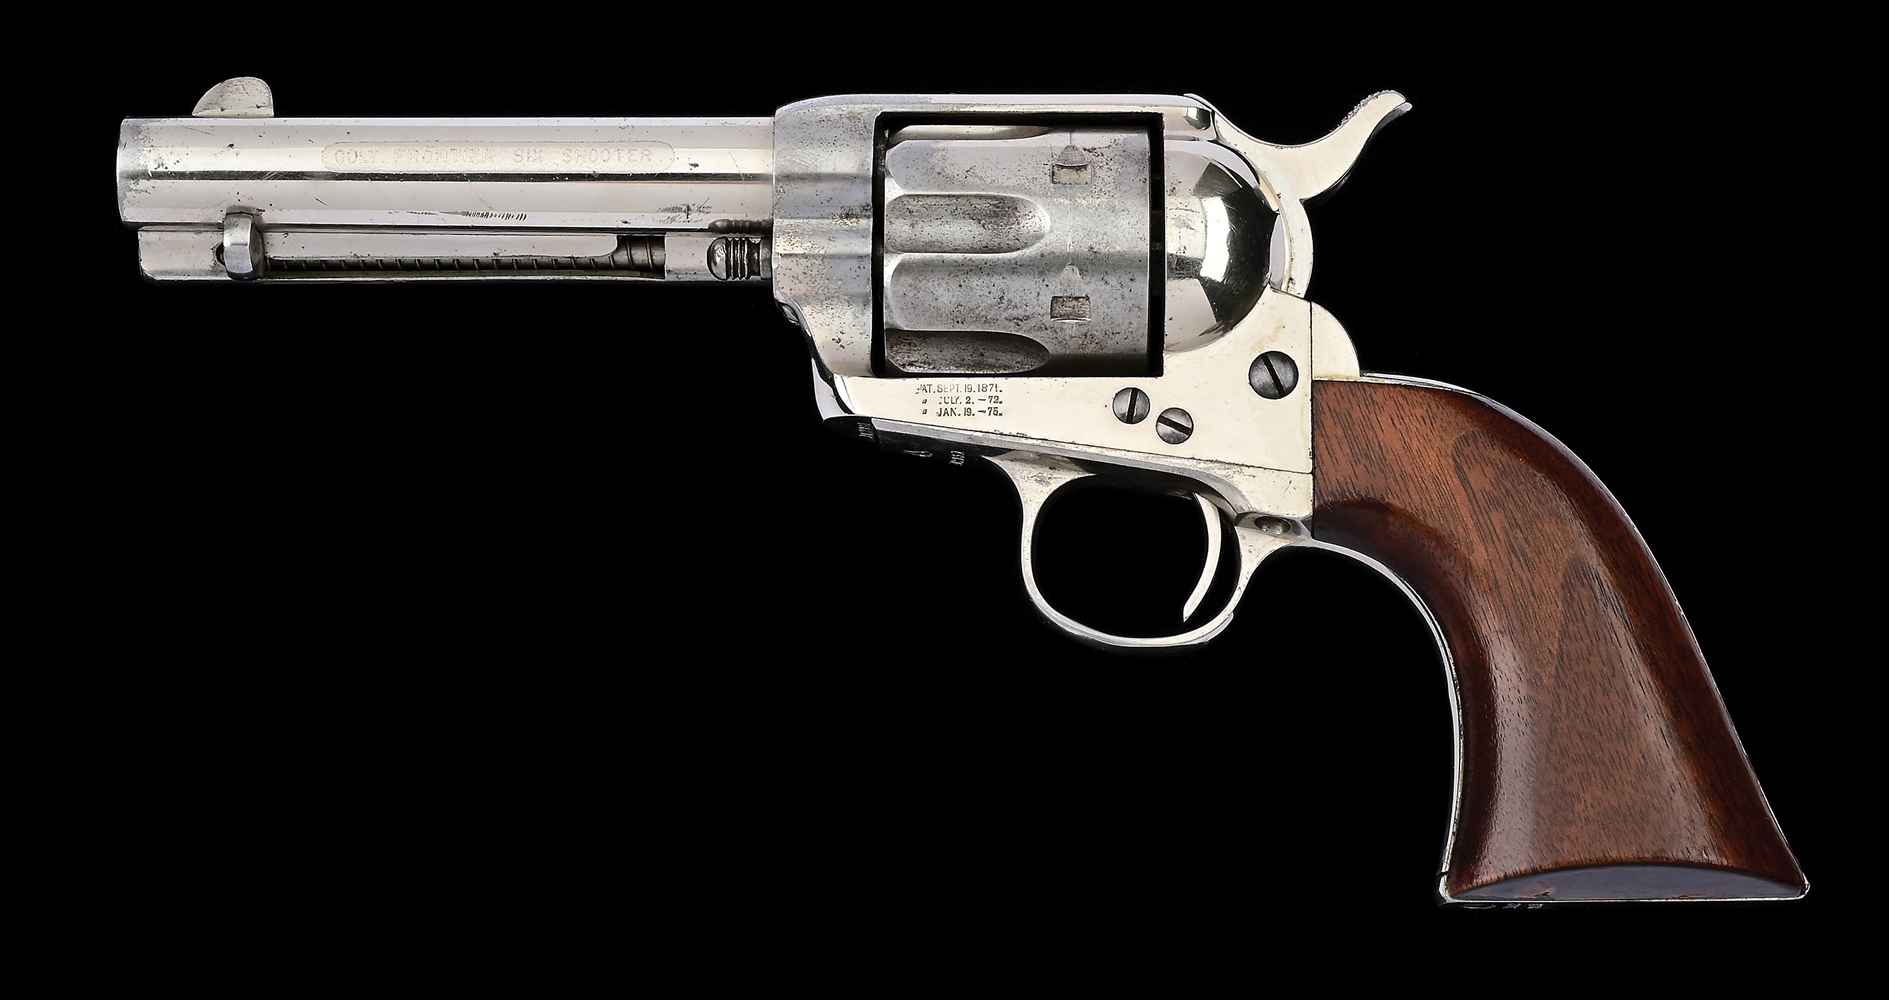 (A) EXCELLENT NICKEL PLATED ETCHED PANEL COLT SINGLE ACTION ARMY FRONTIER SIX SHOOTER REVOLVER WITH FACTORY LETTER (1886).